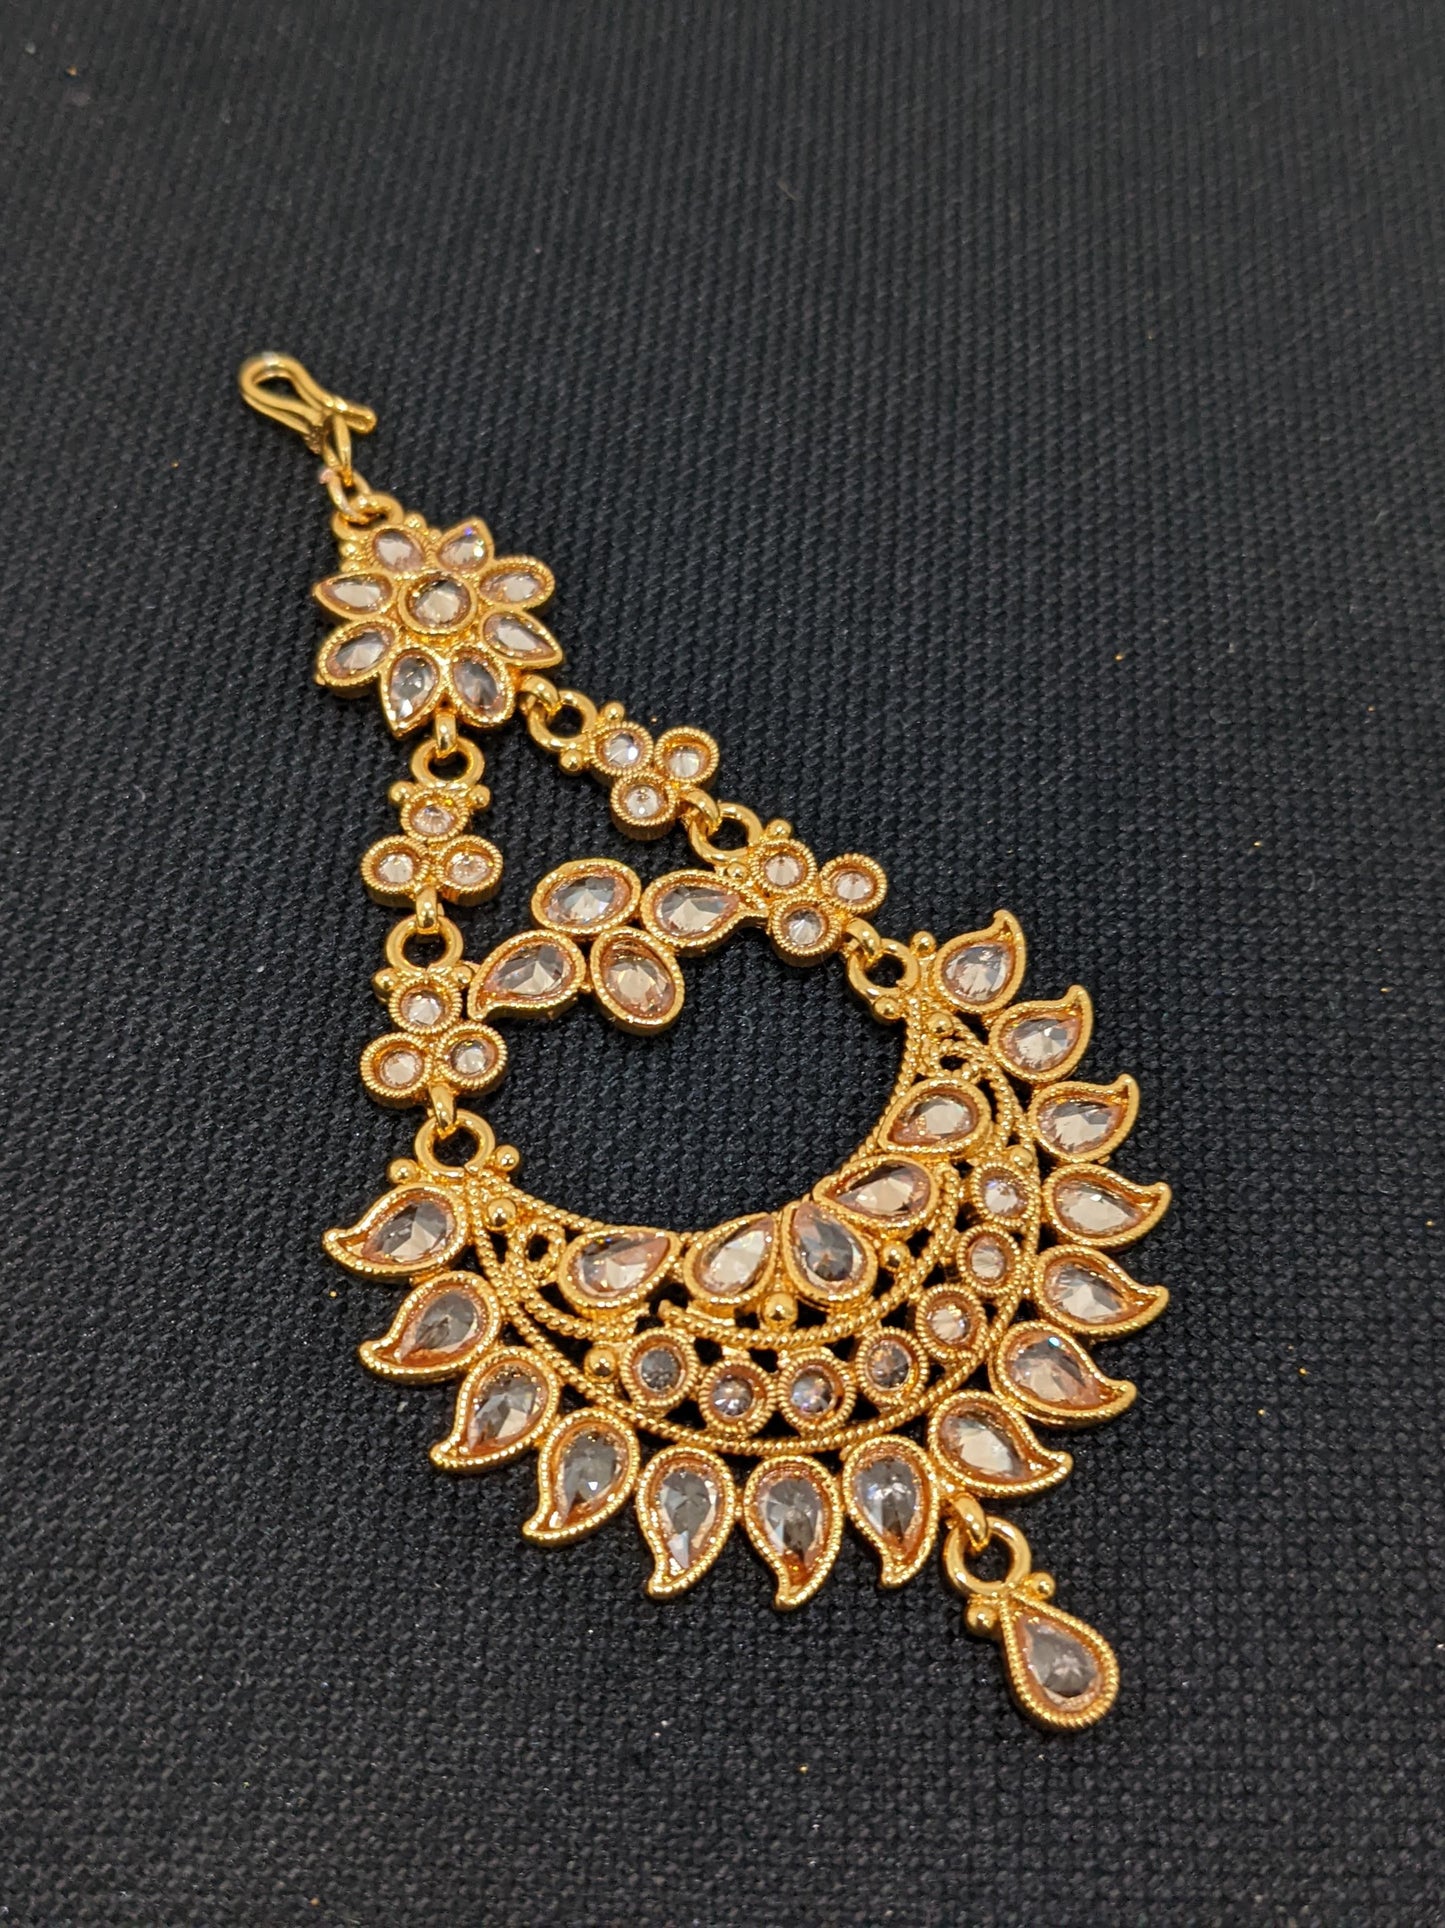 Gold plated necklace with earrings and tikka Our prices are in US